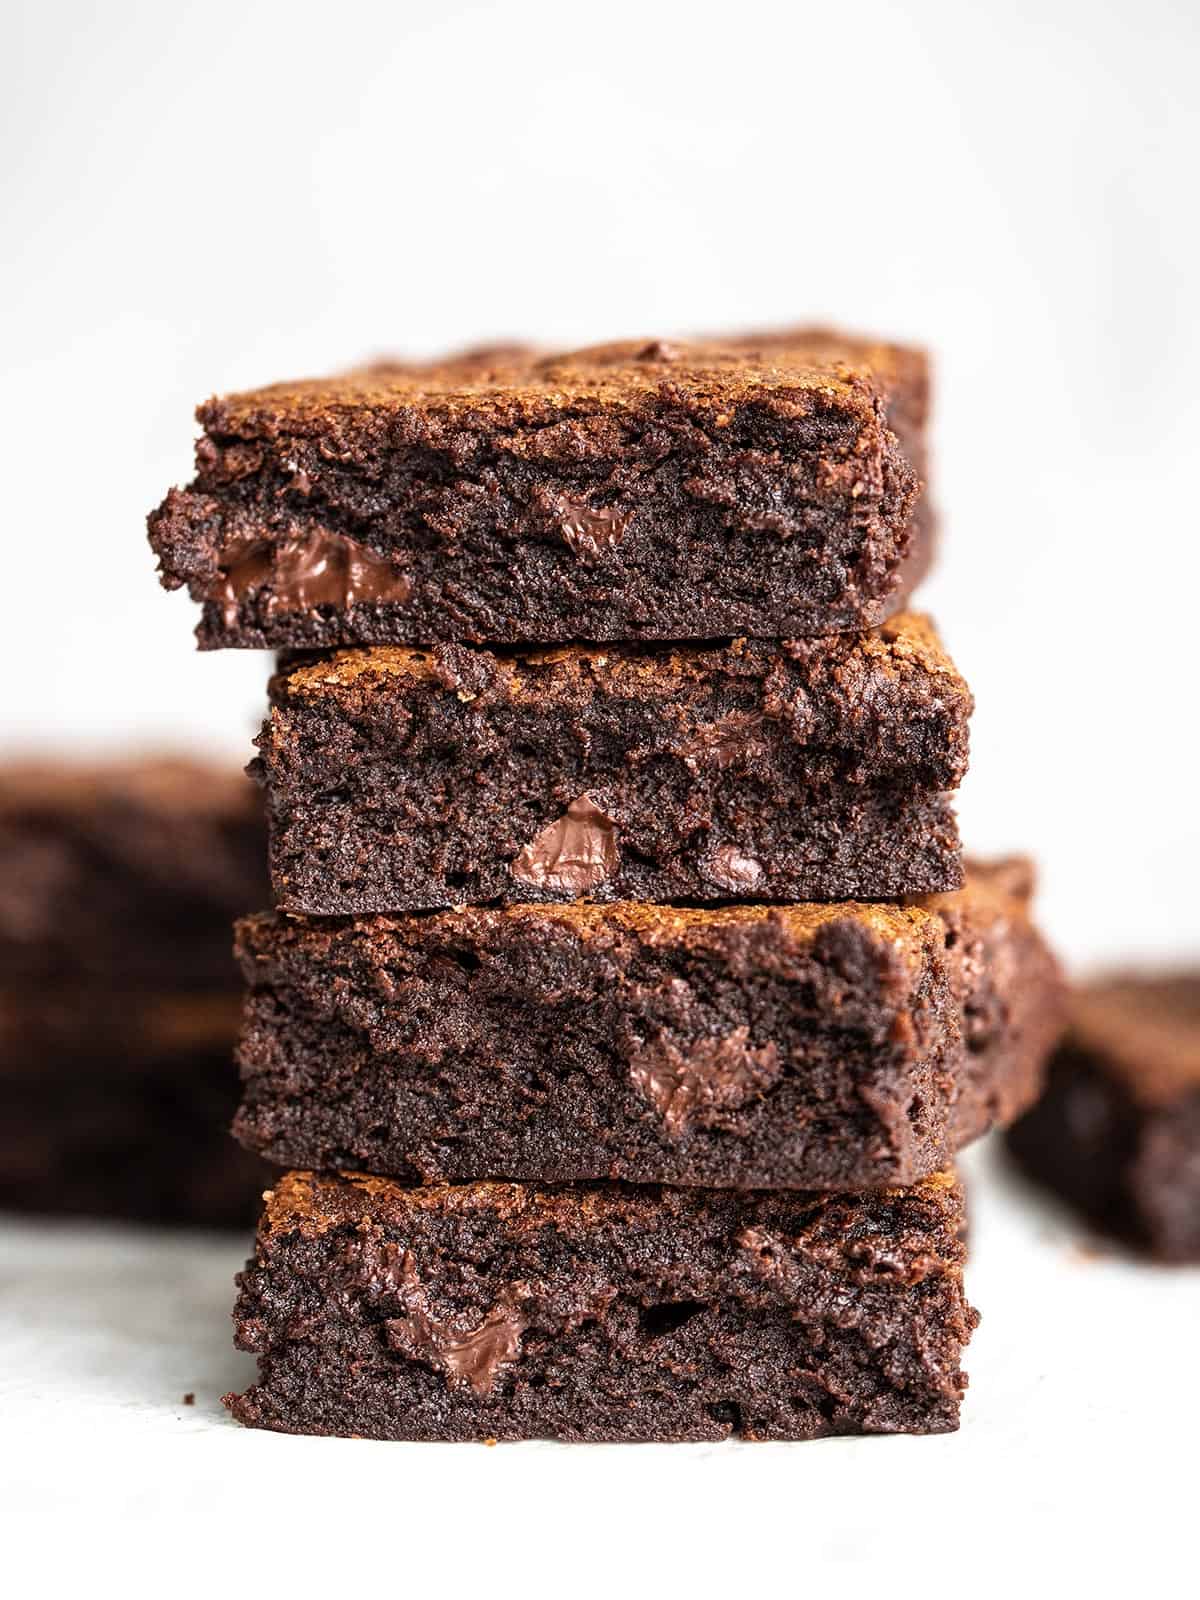 A stack of fudgy homemade brownies.